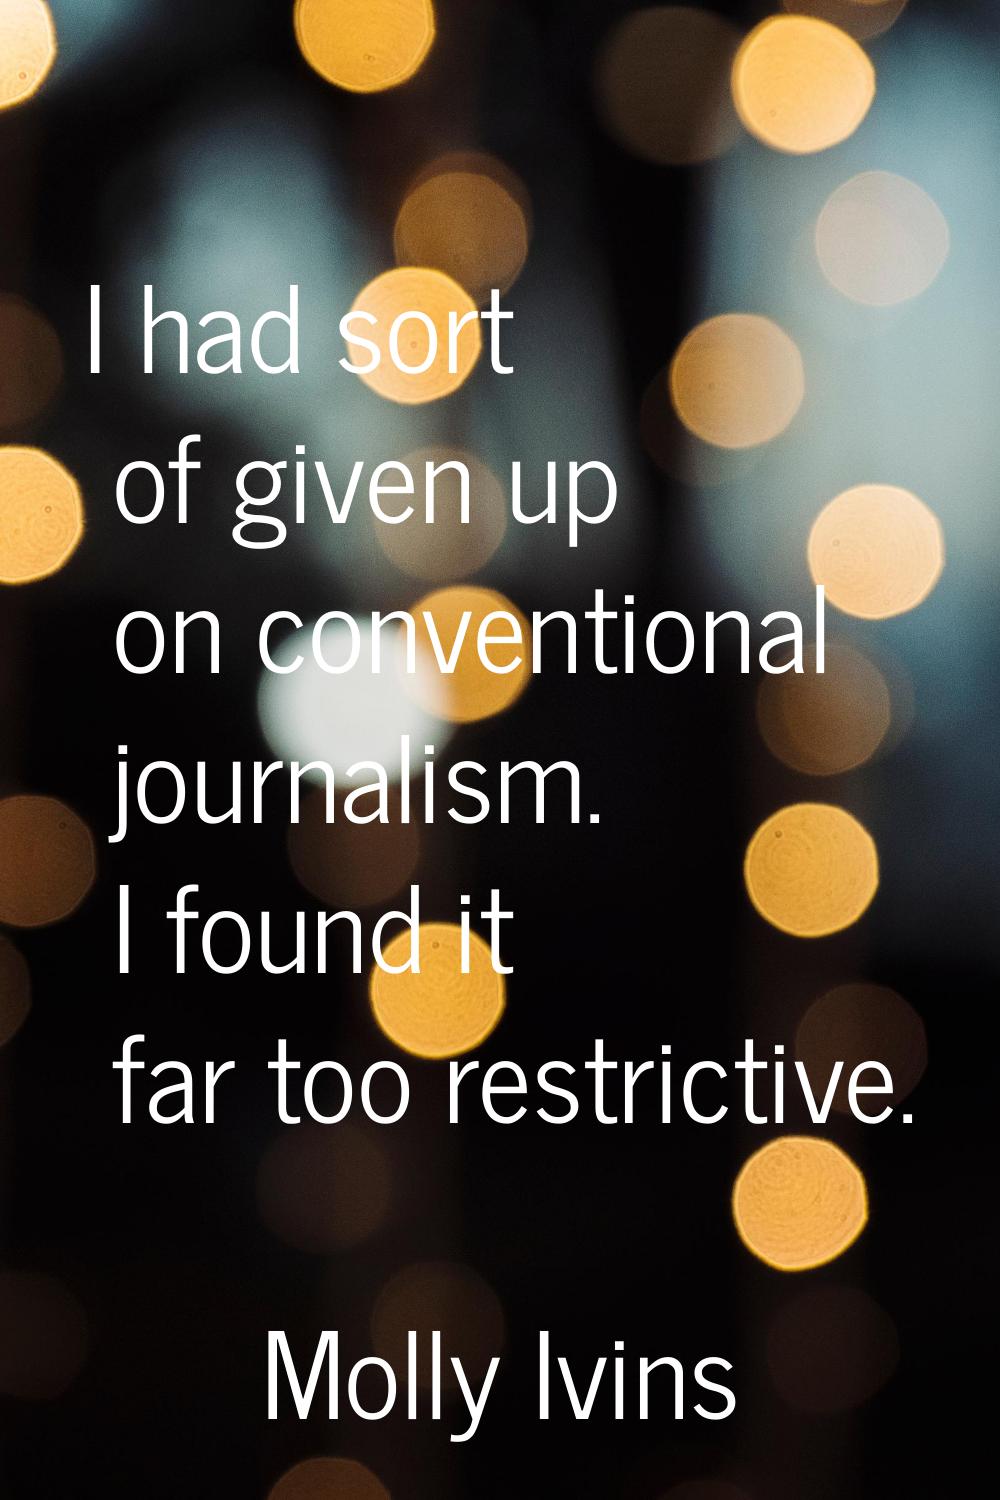 I had sort of given up on conventional journalism. I found it far too restrictive.